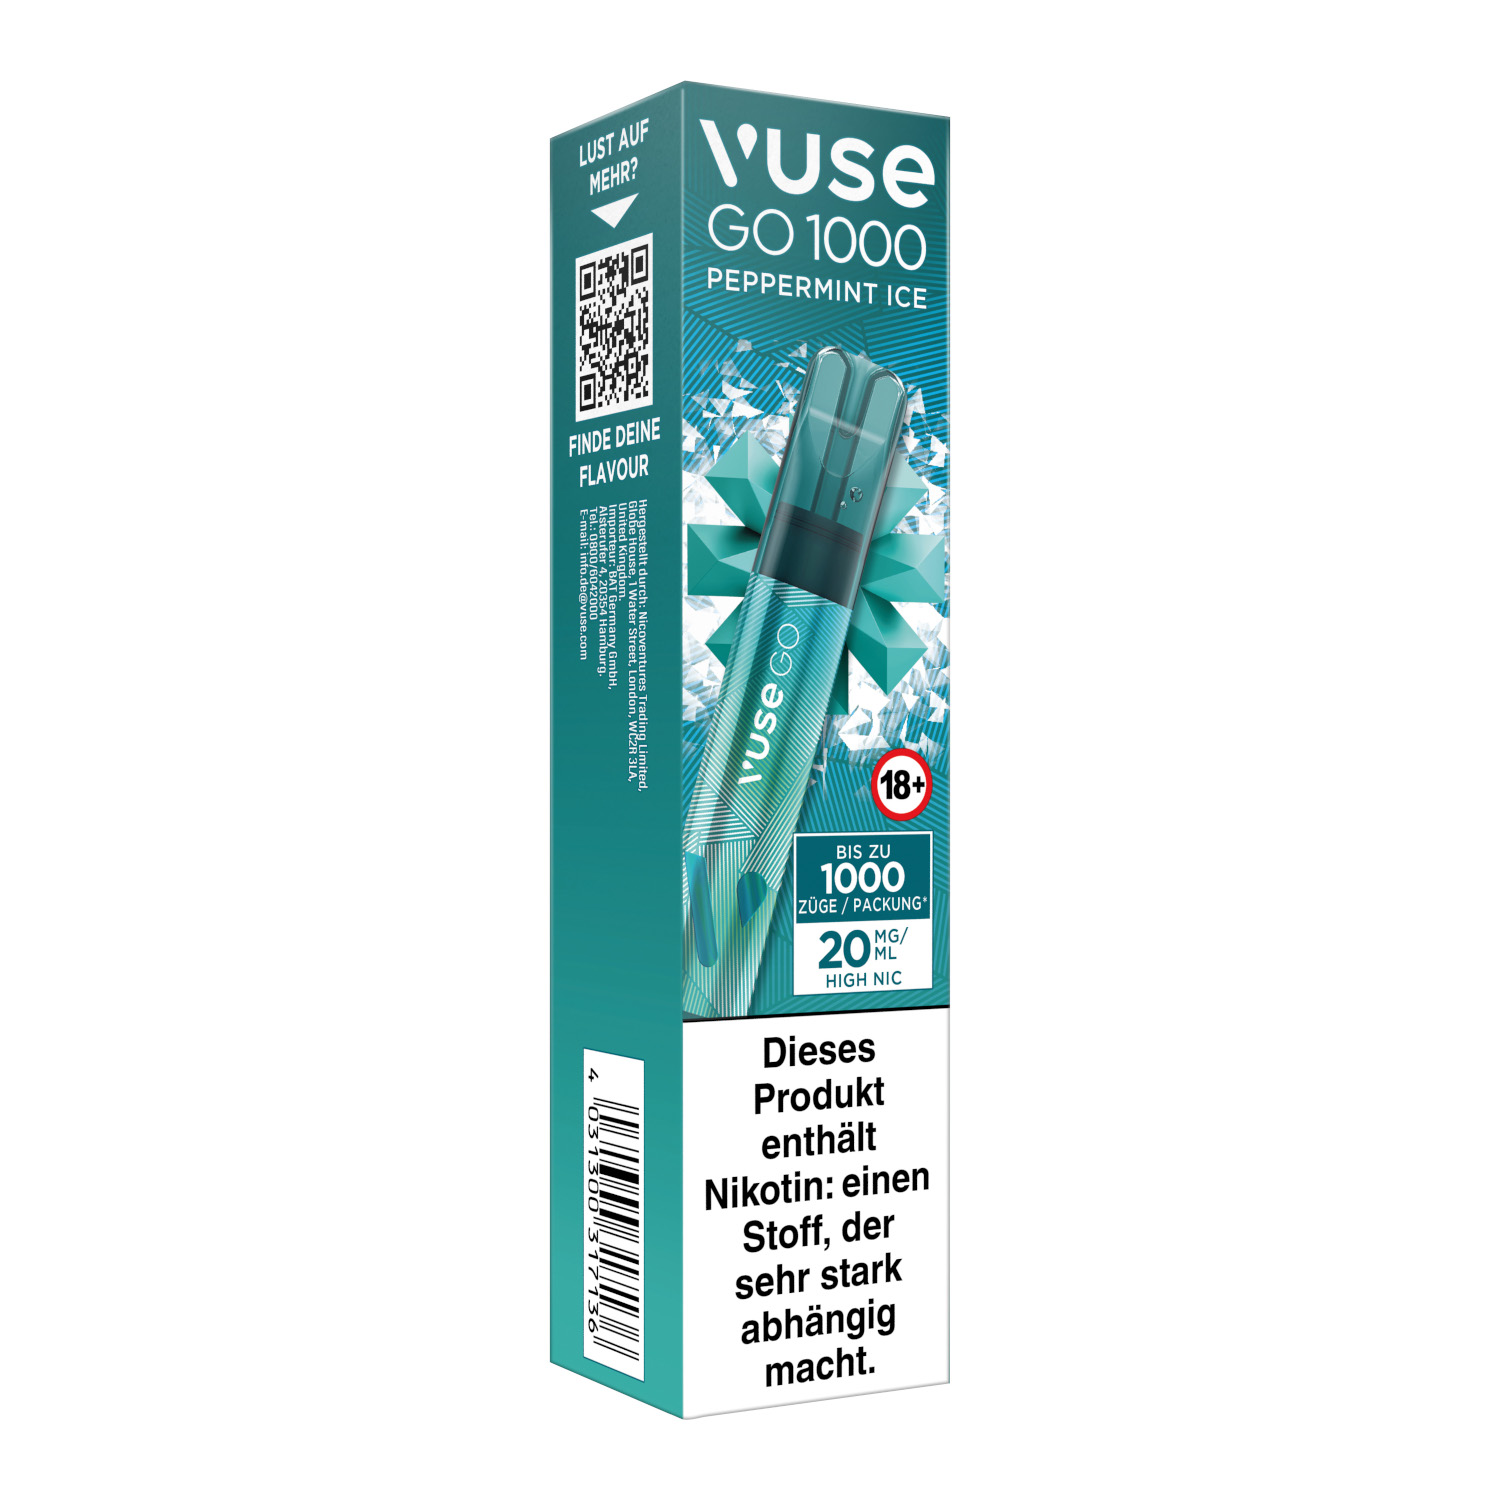 VUSE GO 1000 Peppermint Ice